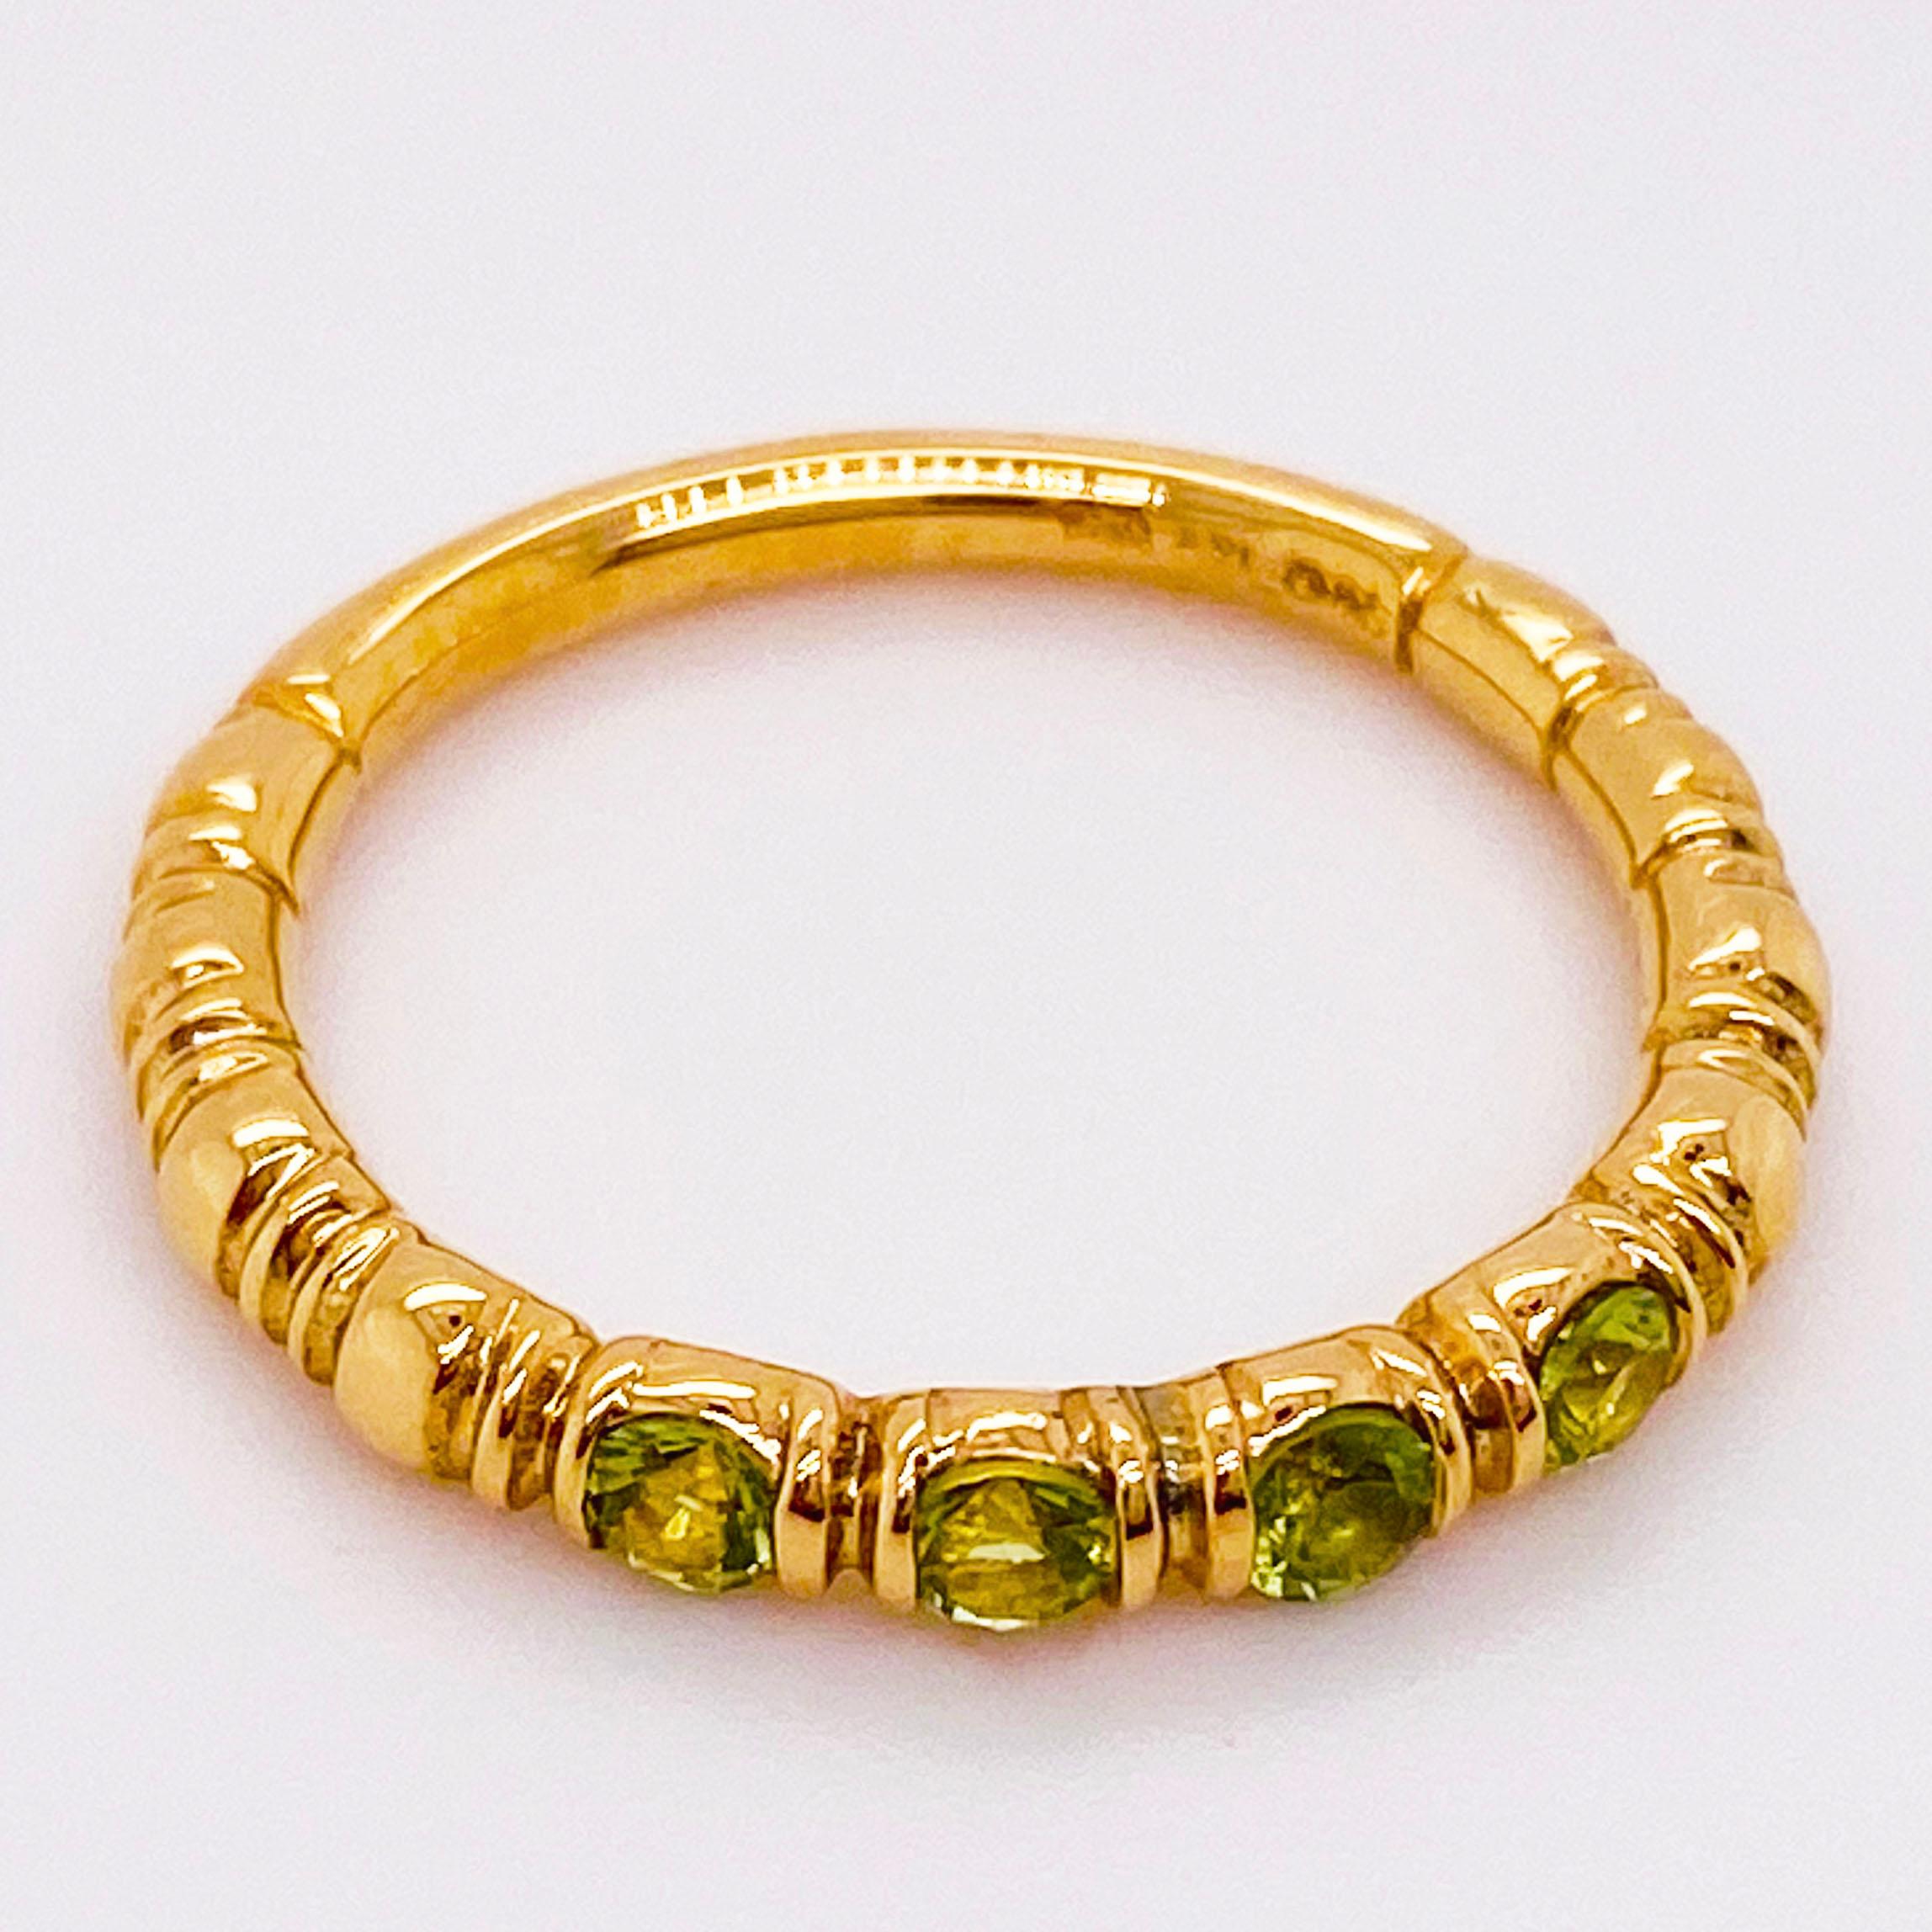 Adorable, dainty August birthstone stackable band. The perfect birthday or anniversary gift for August celebrations! This peridot band has four genuine peridot gemstones set in vertical settings in 14 karat yellow gold. The peridot gemstone looks